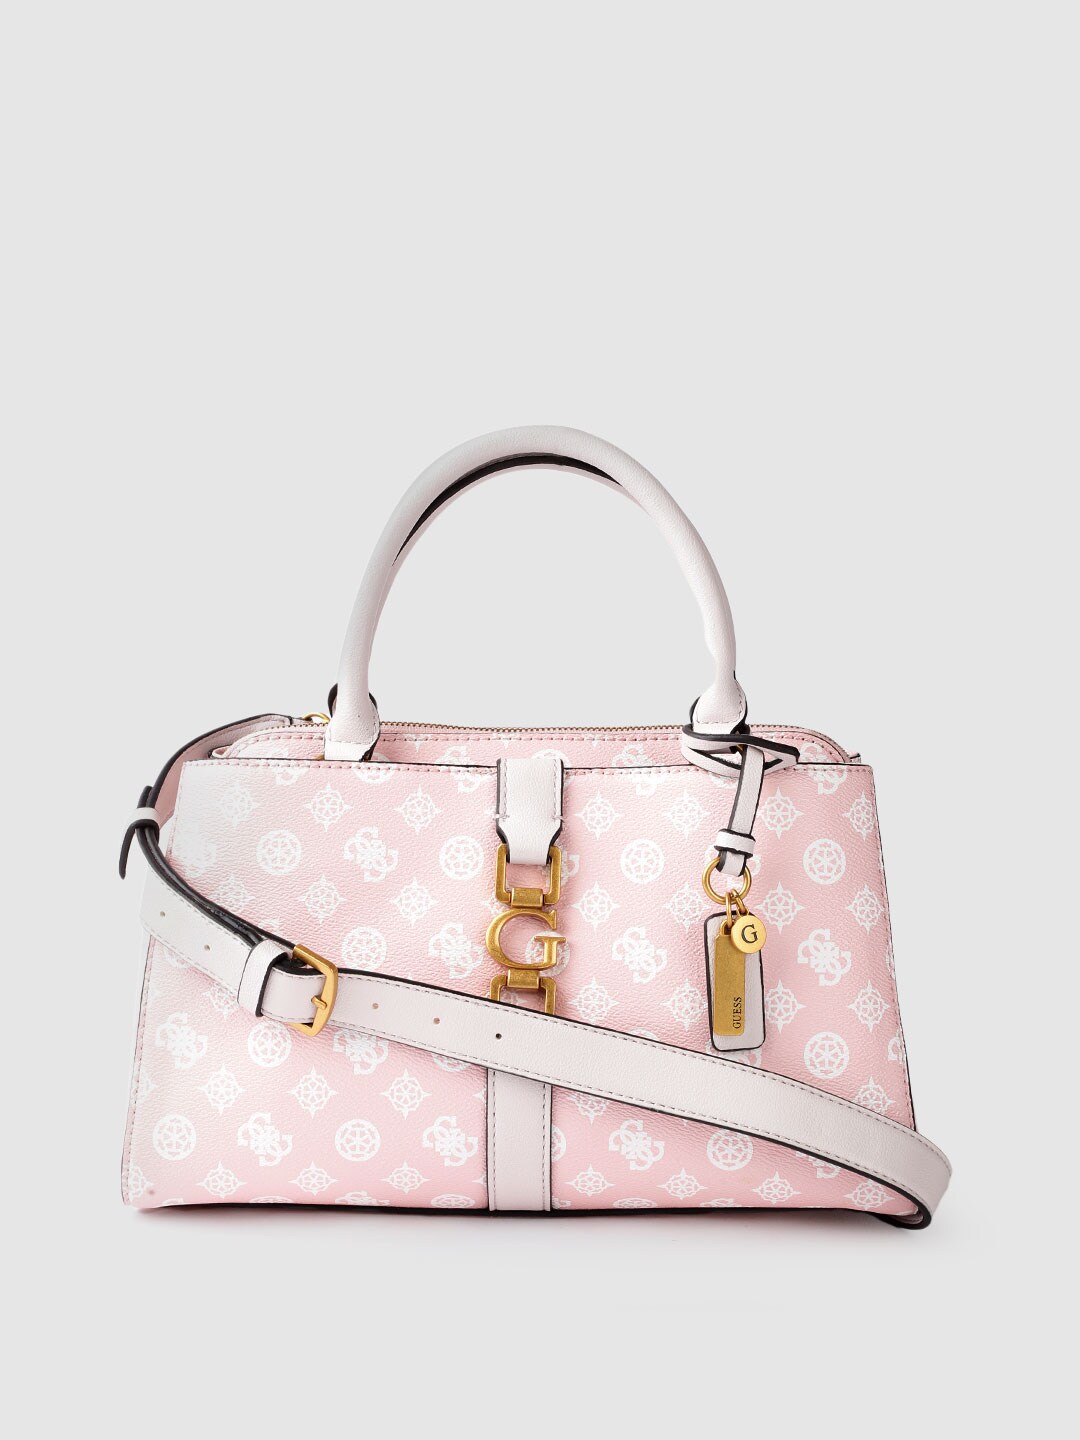 GUESS Pink & White Ethnic Motifs Printed Handheld Bag with Detachable Sling Strap & Tab Price in India